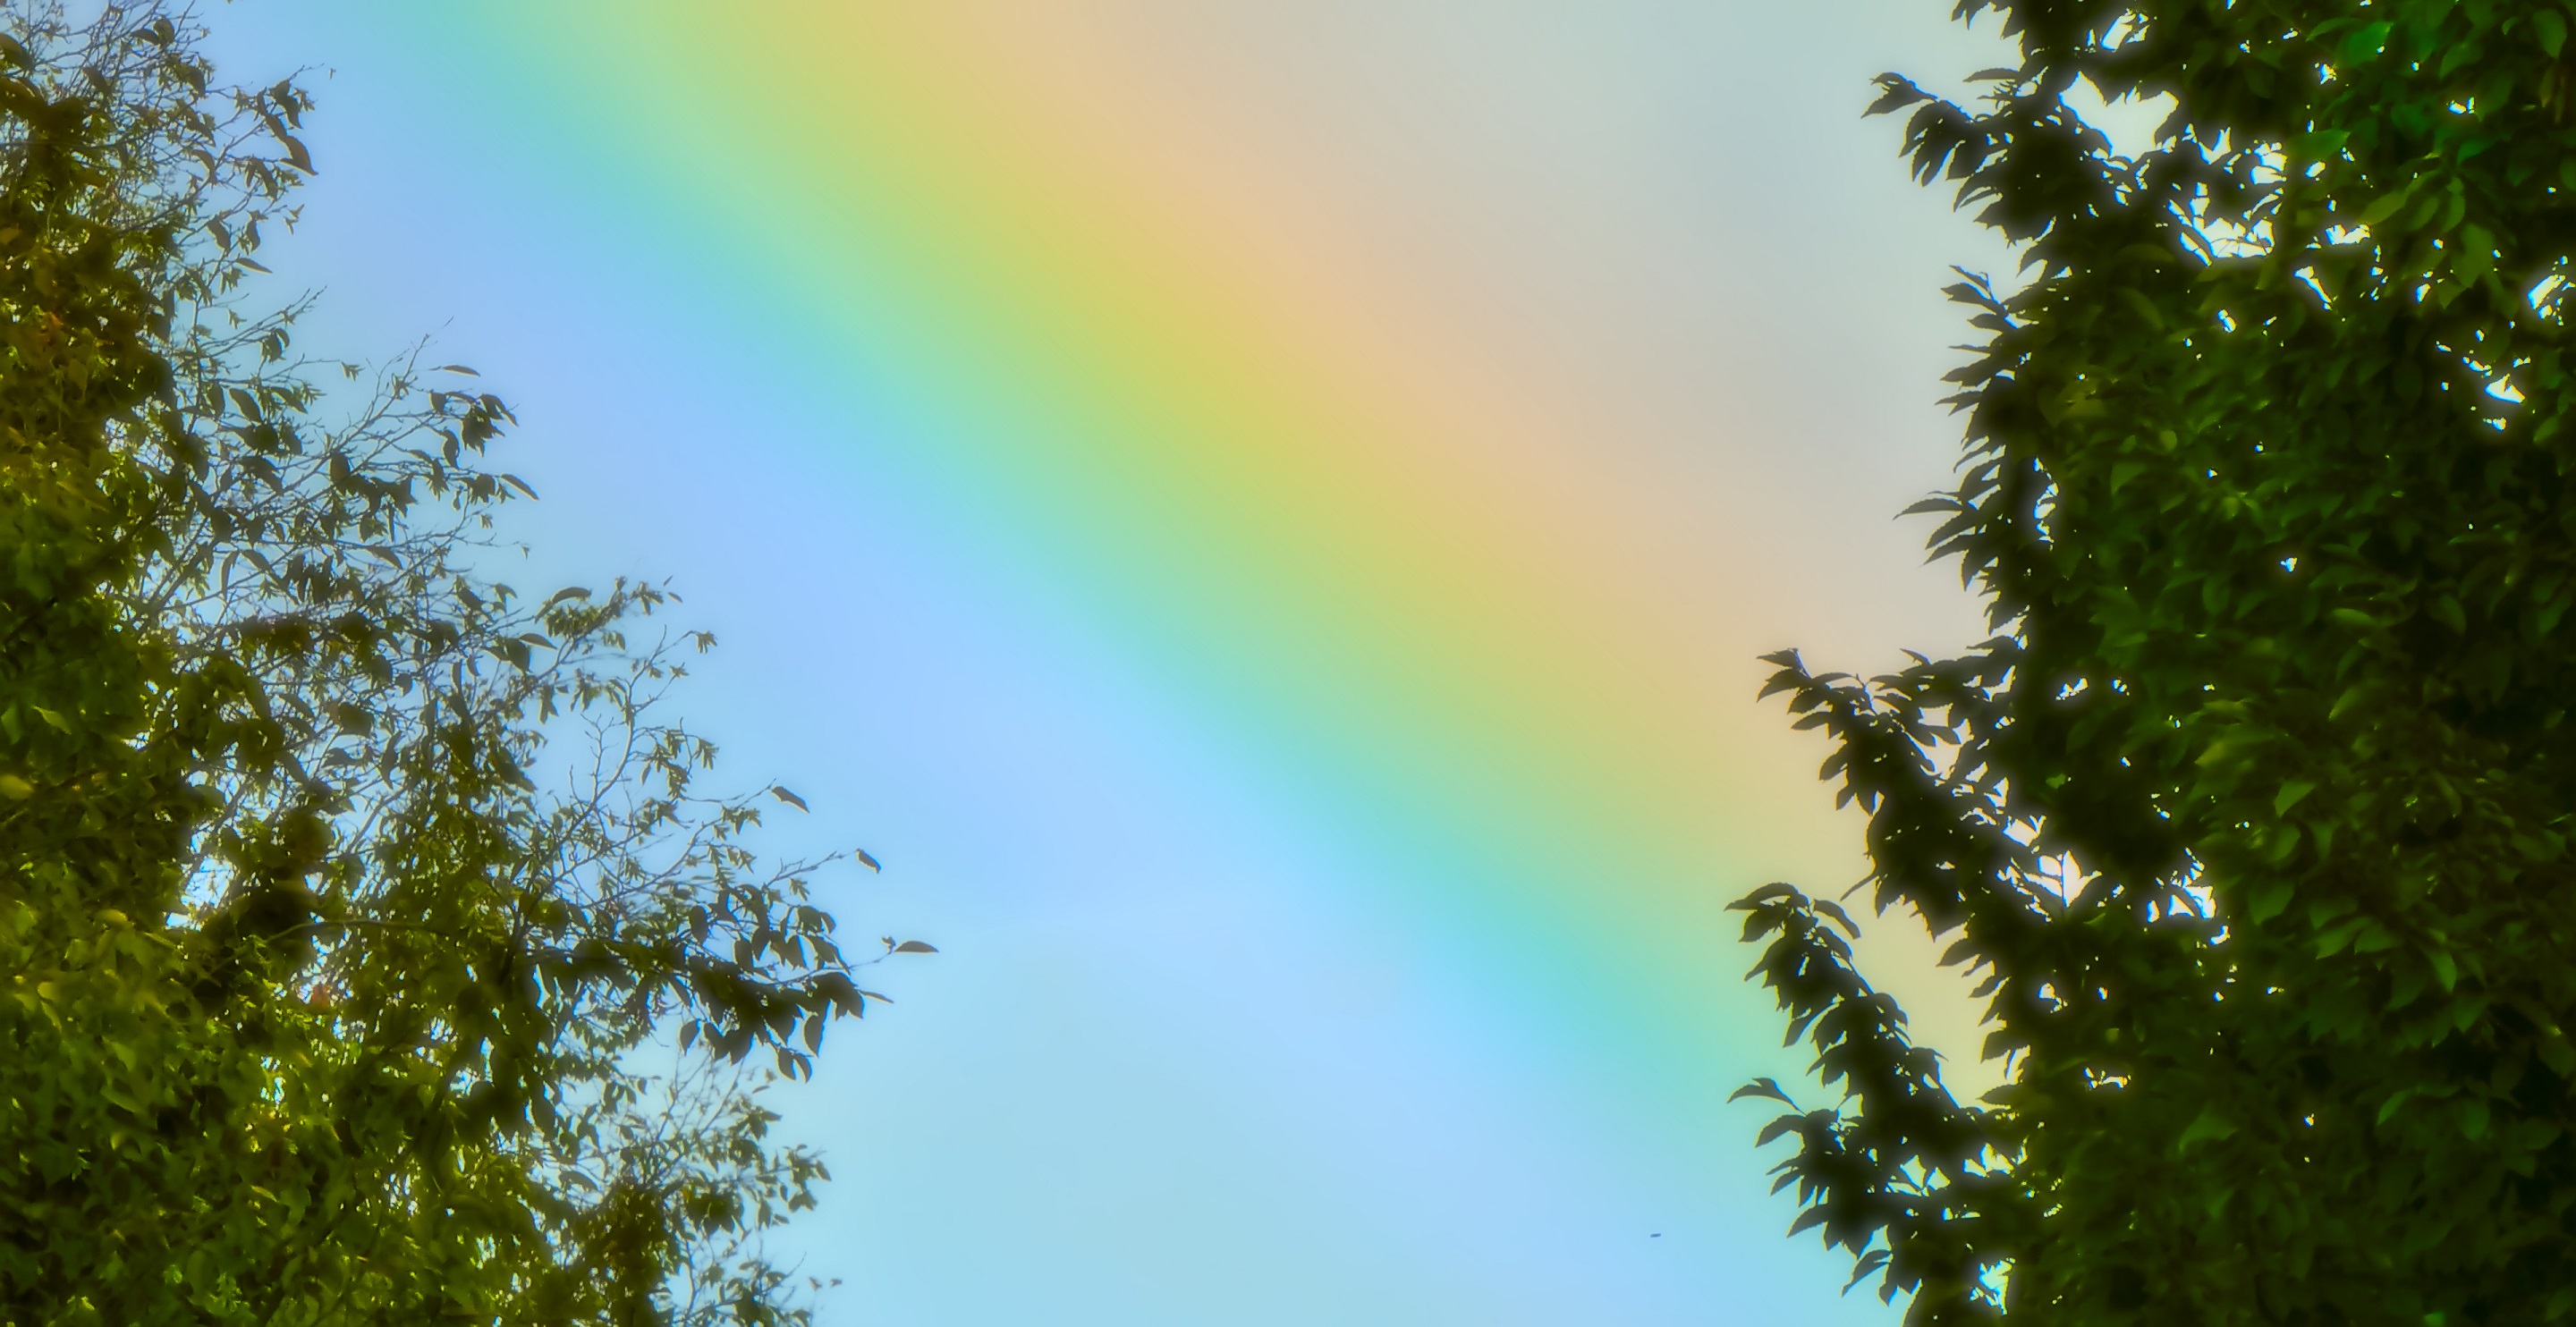 Pictured: A rainbow in a clear blue sky, framed by the edges of two trees to the left and right.